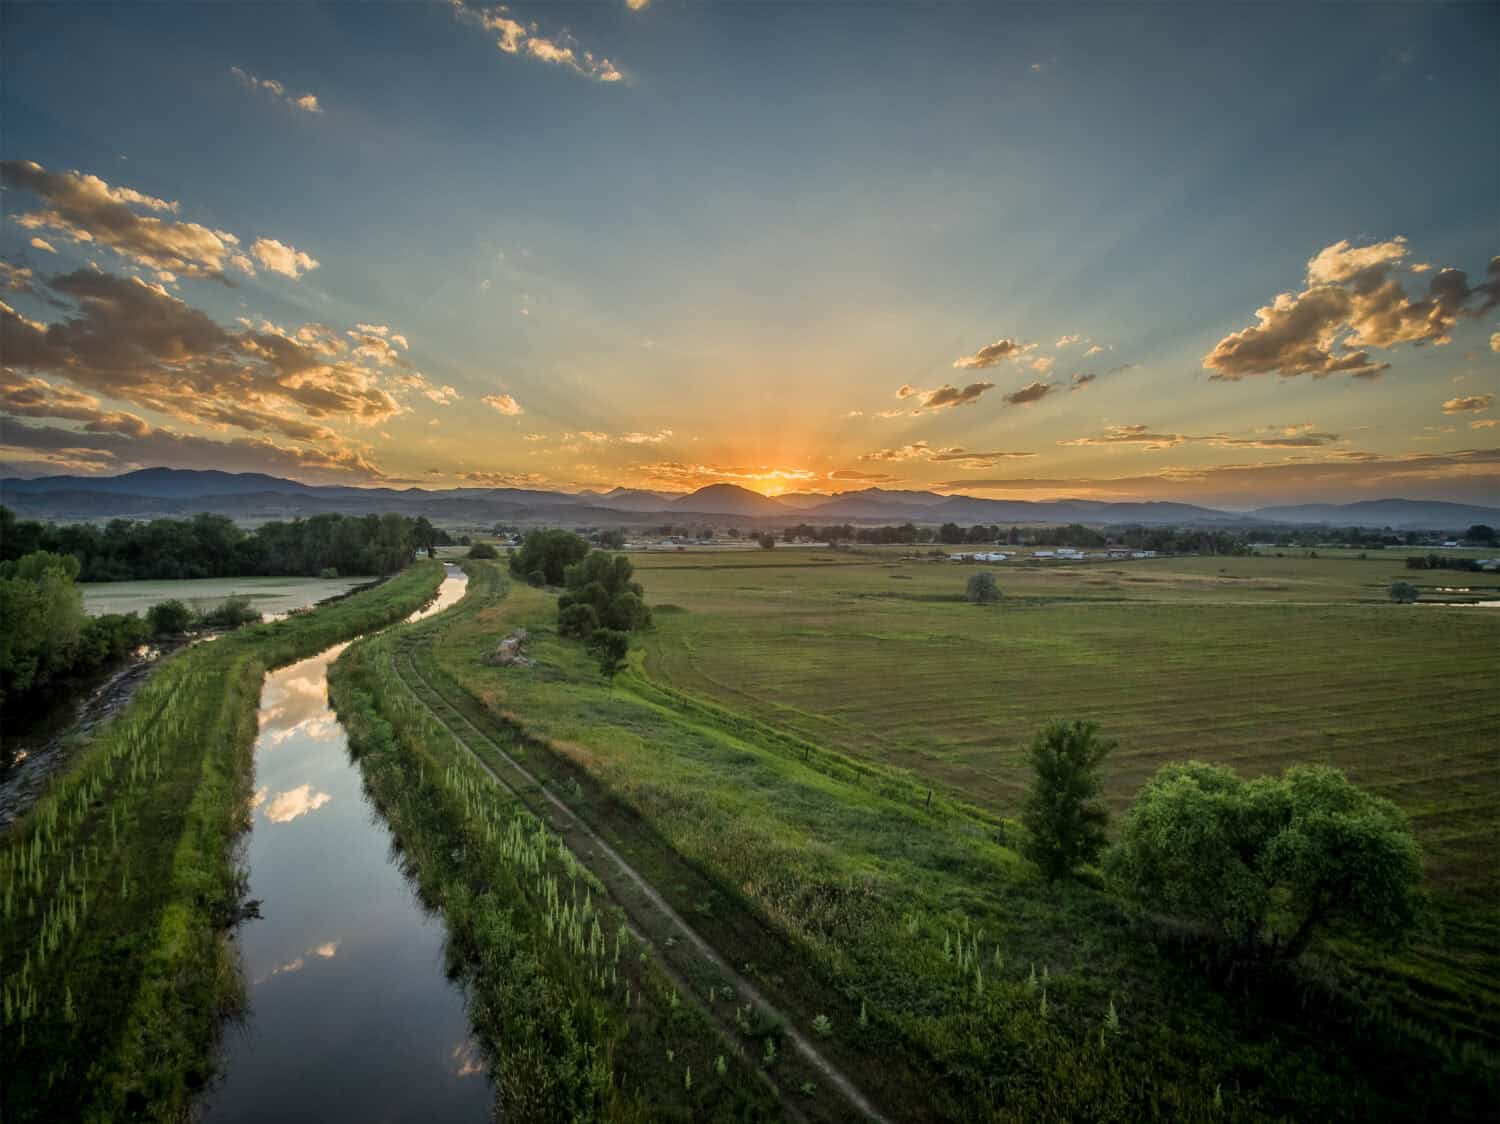 sunset over Rocky Mountains and foothills with an irrigation ditch - aerial view, northern Colorado near Loveland by marekuliasz